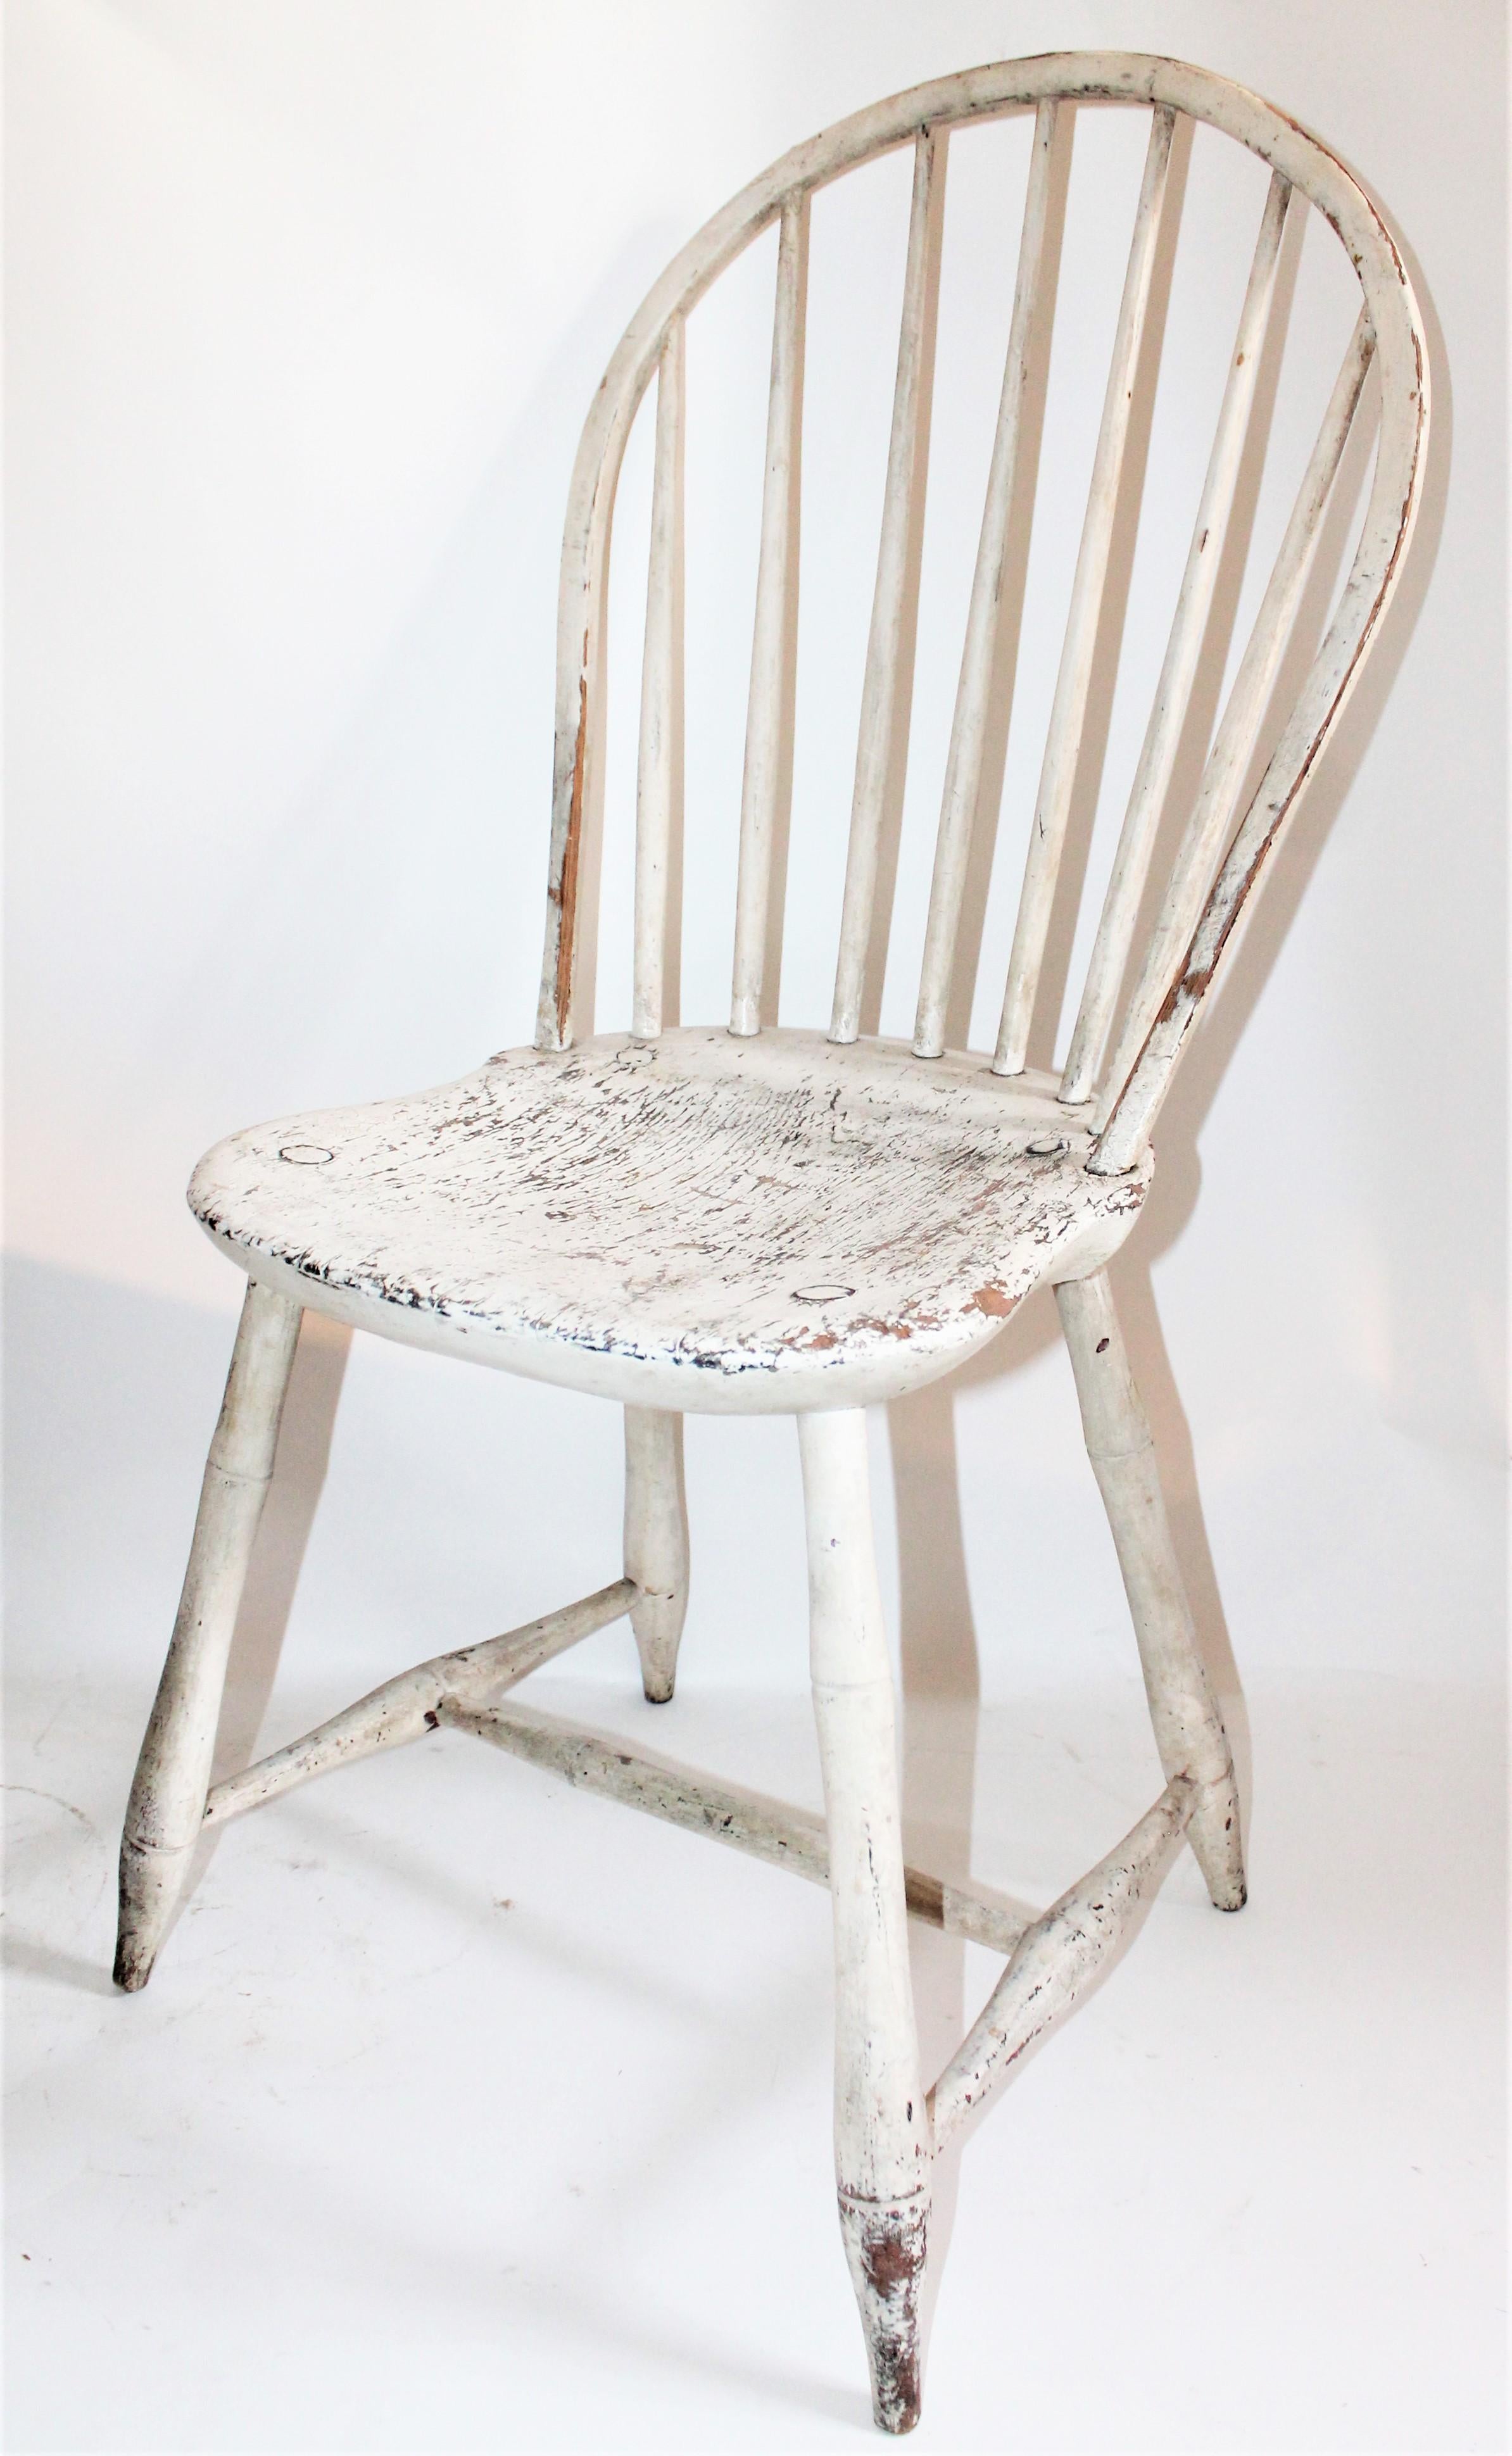 This fine original painted balloon back Windsor chair is in great untouched surface paint. This chair was found in Pennsylvania but is from or made in New England.